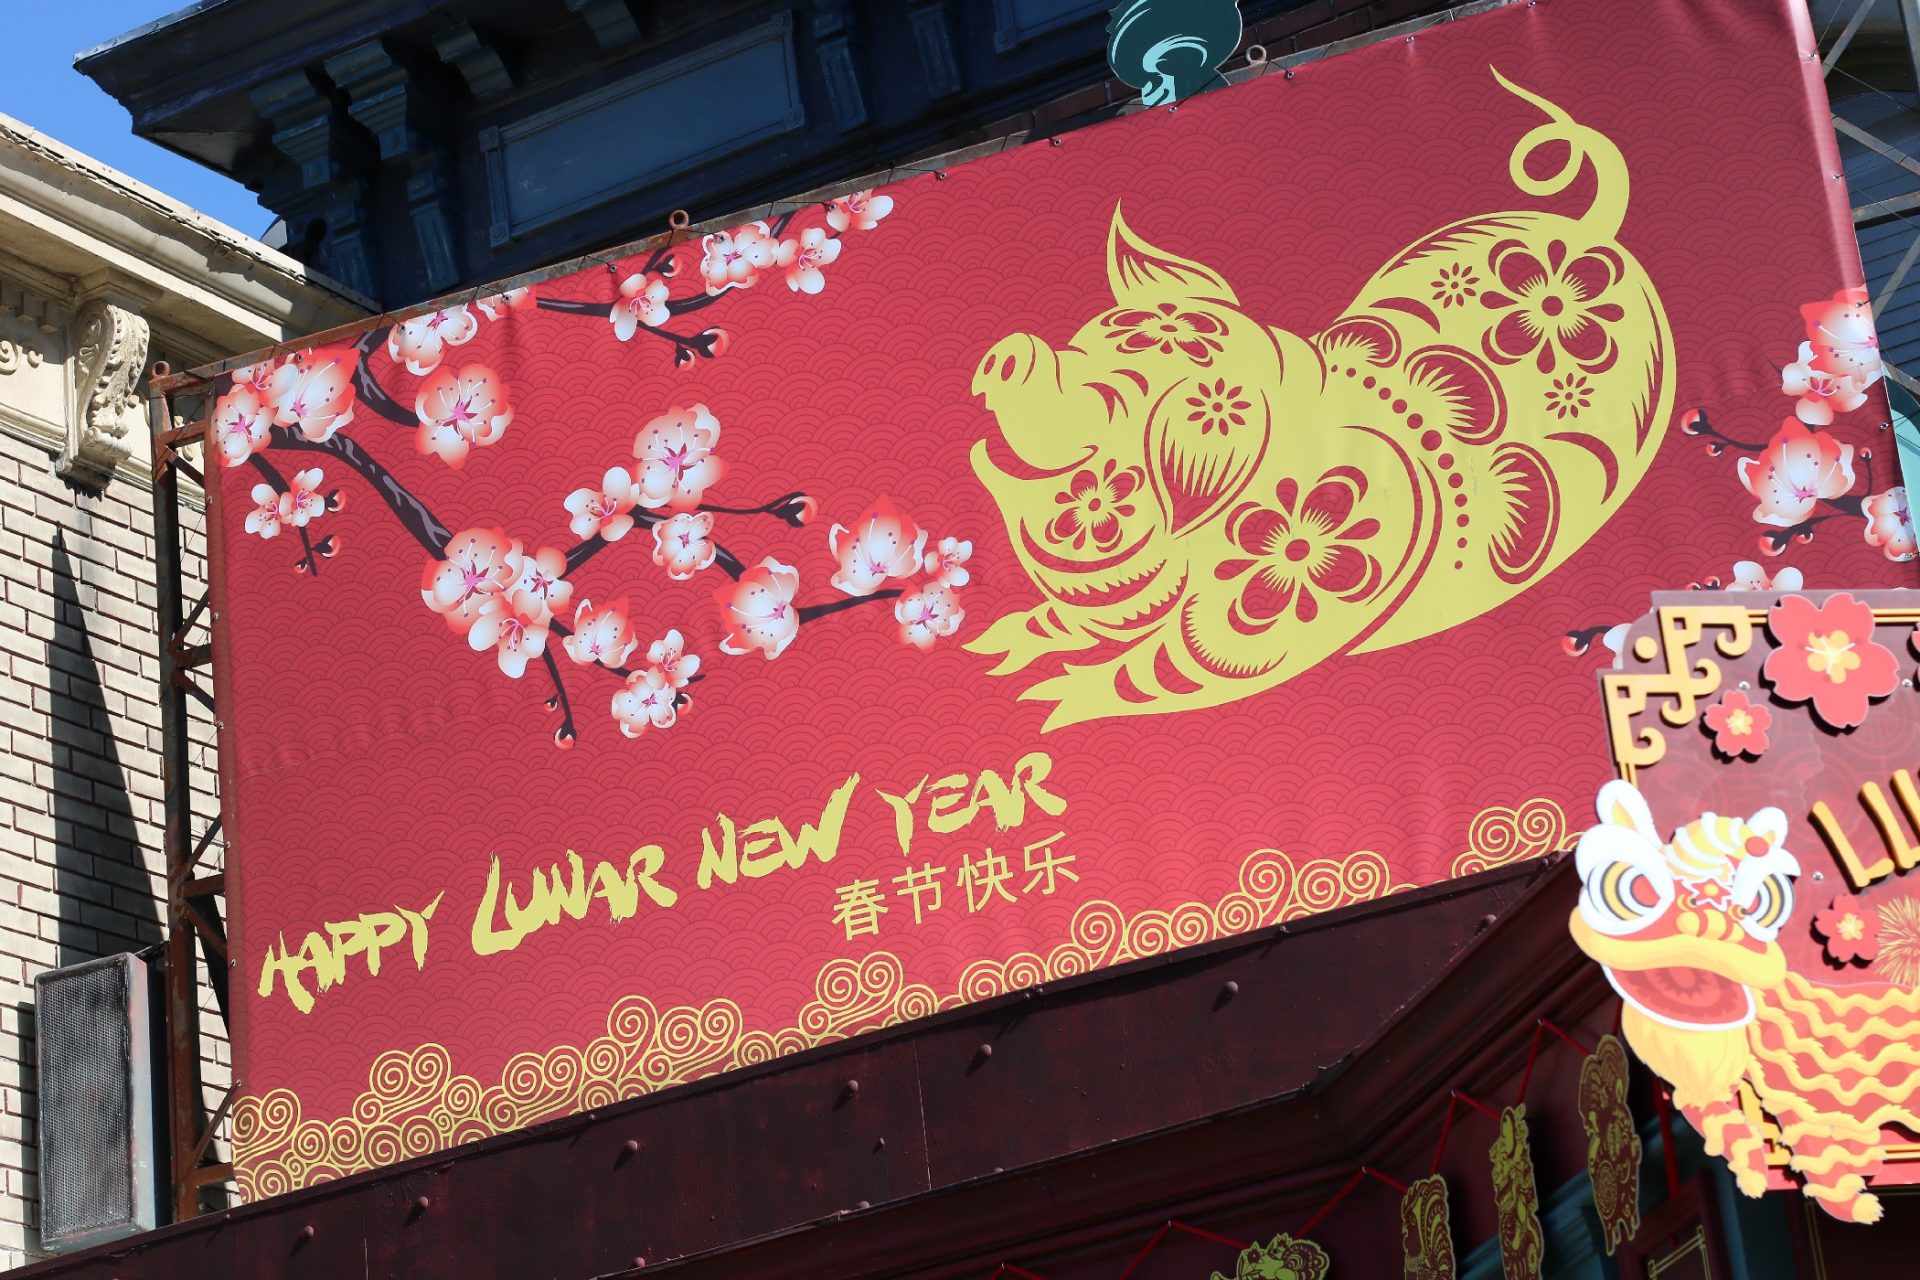 REVIEW Lunar New Year 2019 at Universal Studios Hollywood Inside